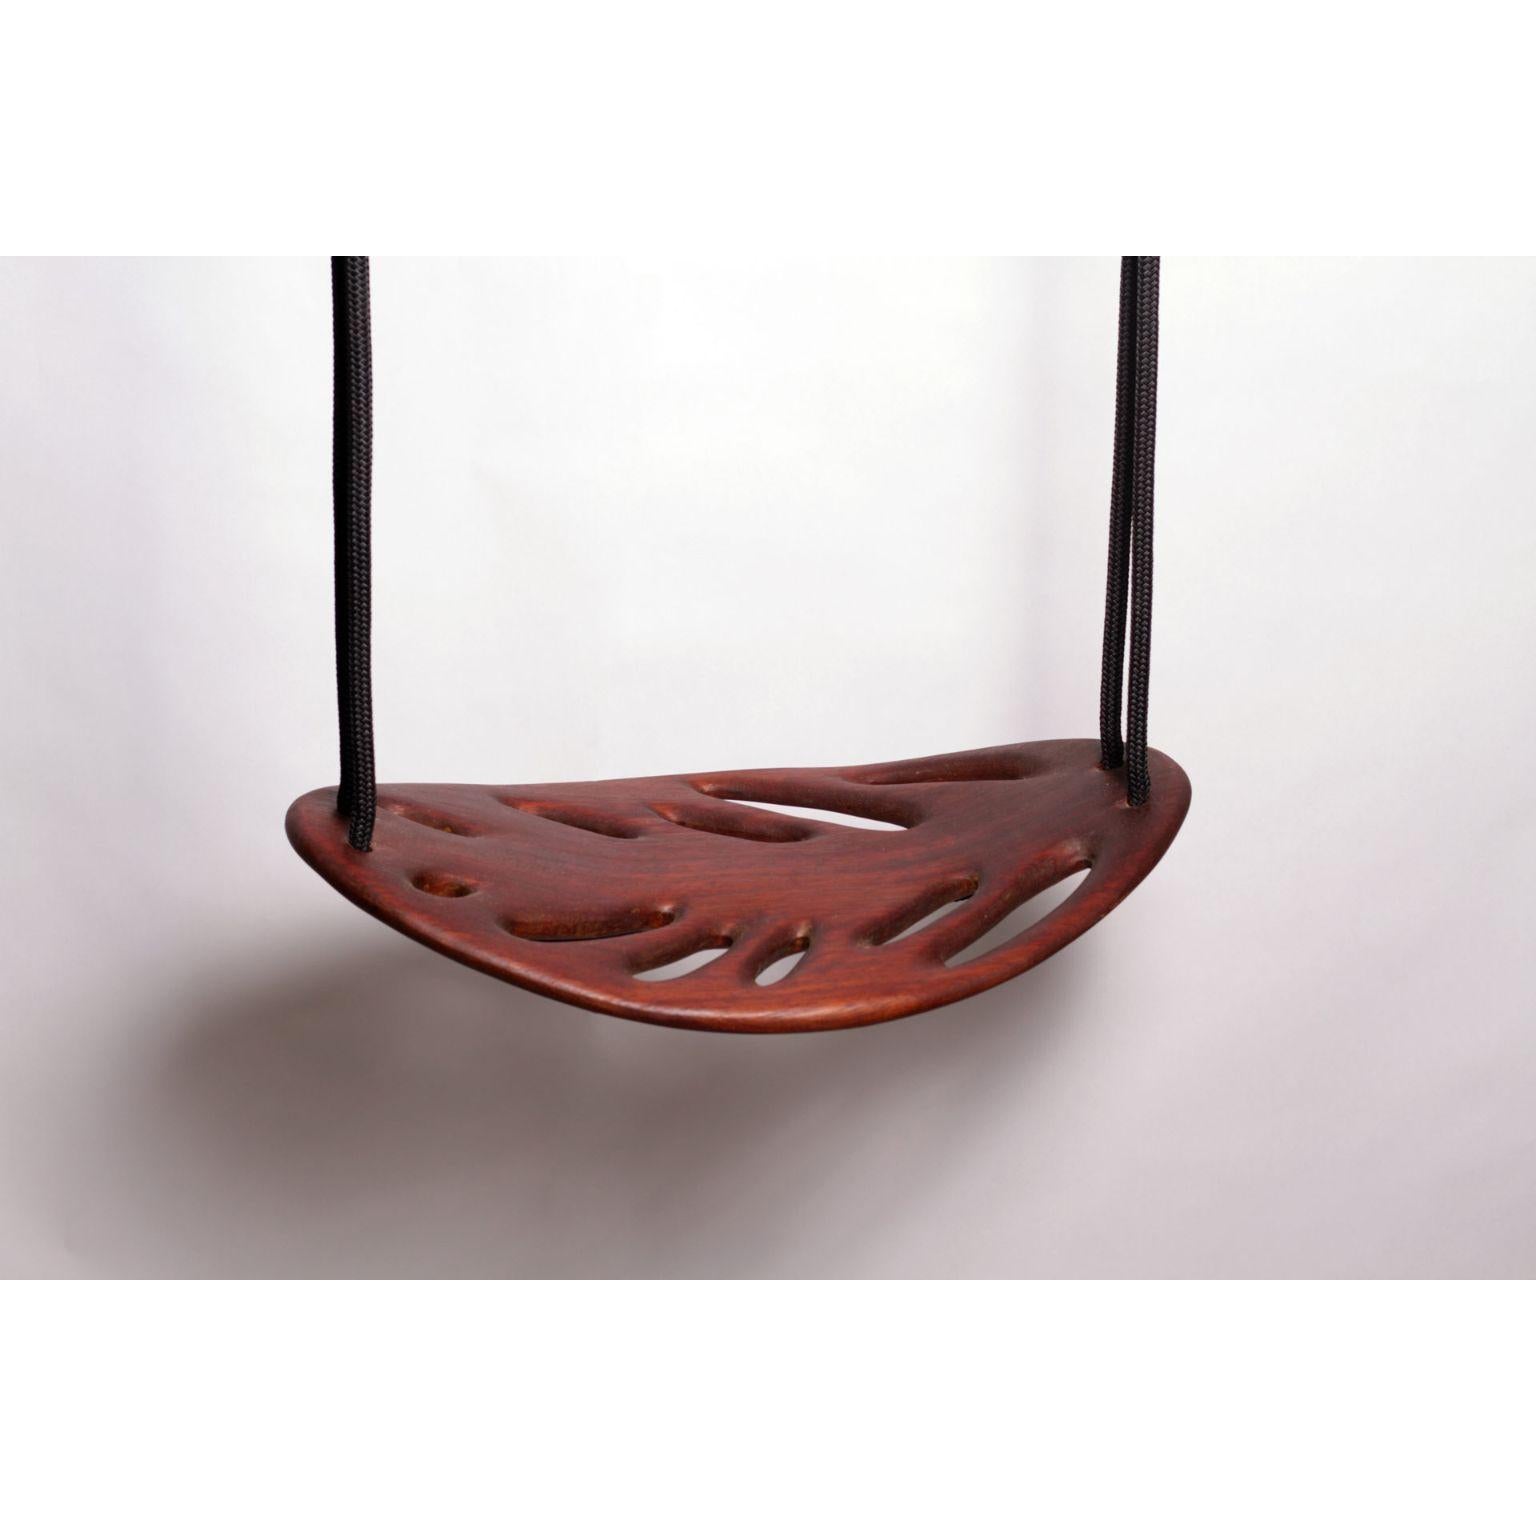 Leaf Swing by Veronica Mar
Dimensions: D55 x W33 x H7 cm
Materials: iroko Wood, Hemp
Weight: 1.5 kg.
Numbered and limited edition to 88 pieces.

Also available in different materials and finishes.

Inspired by the falling leaves in autumn,